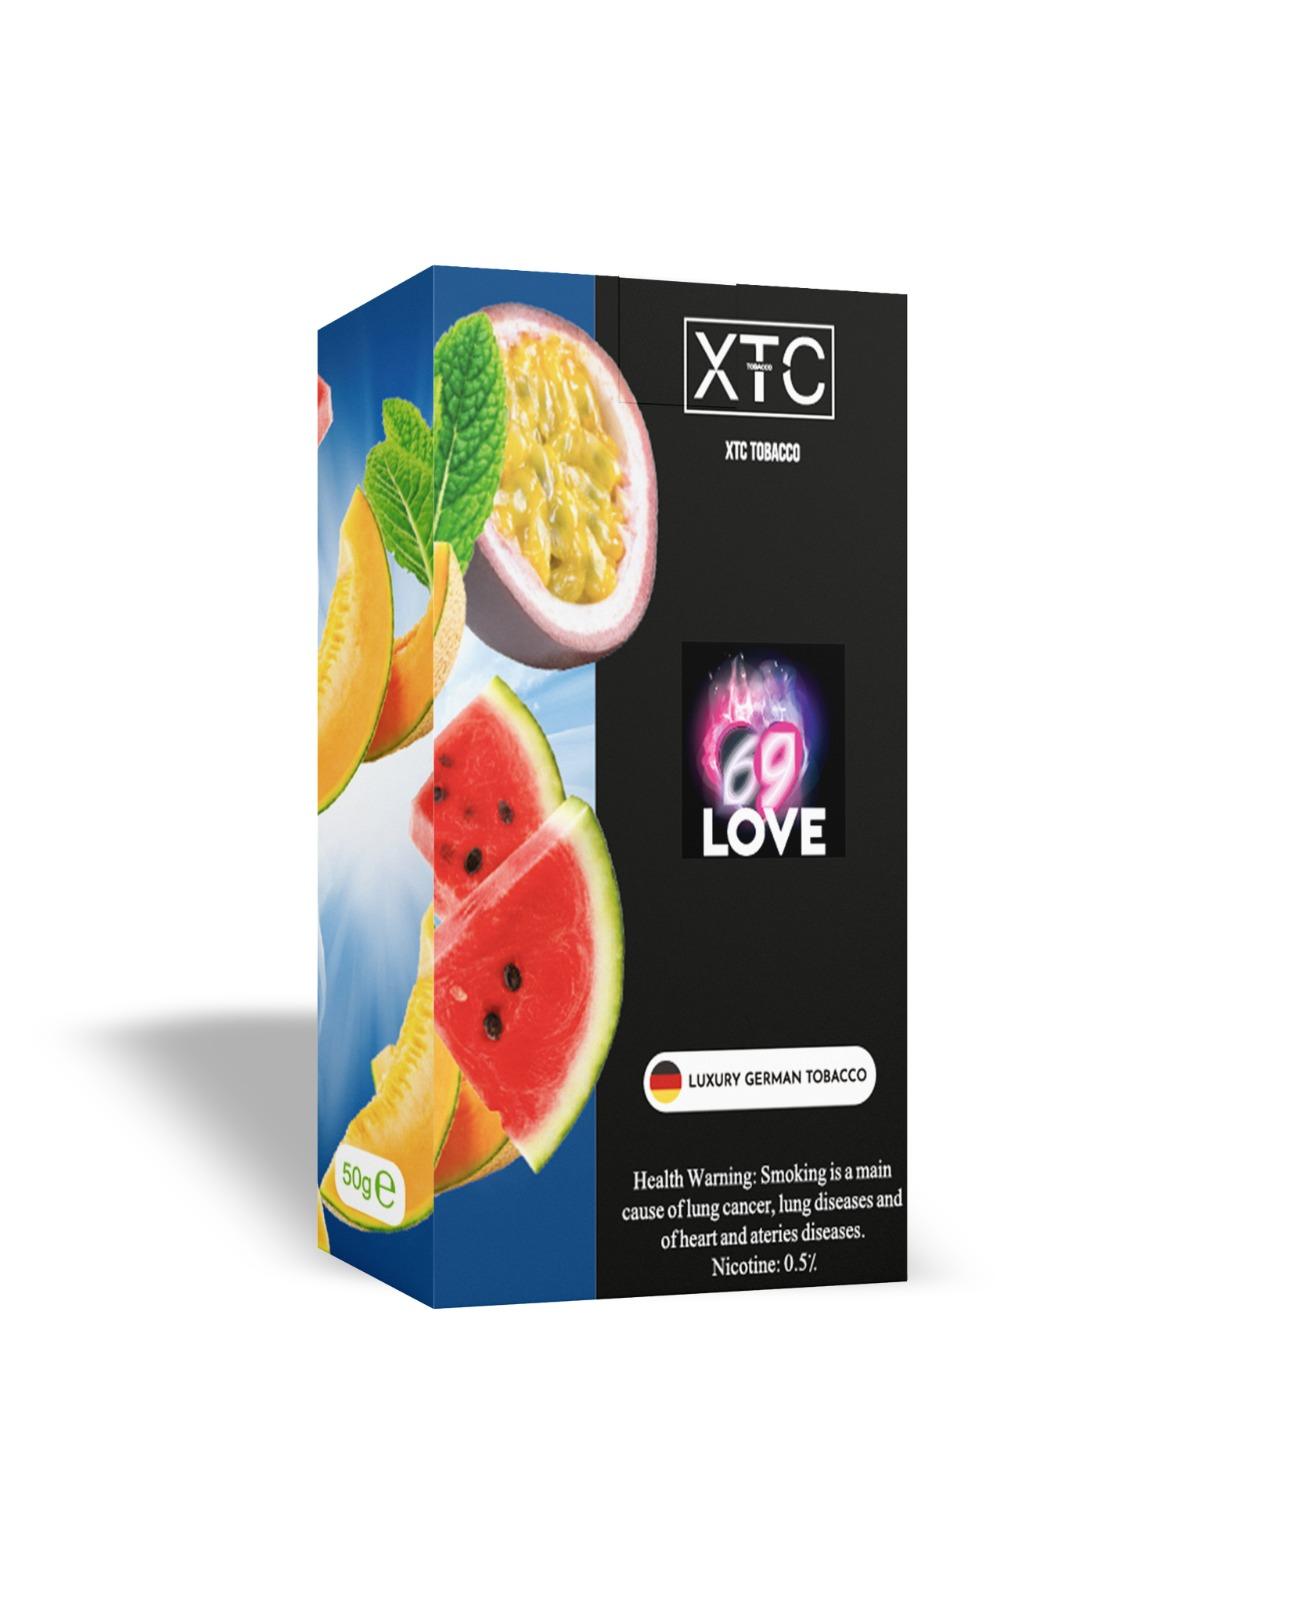 Image of XTC Tobacco product 69 Love